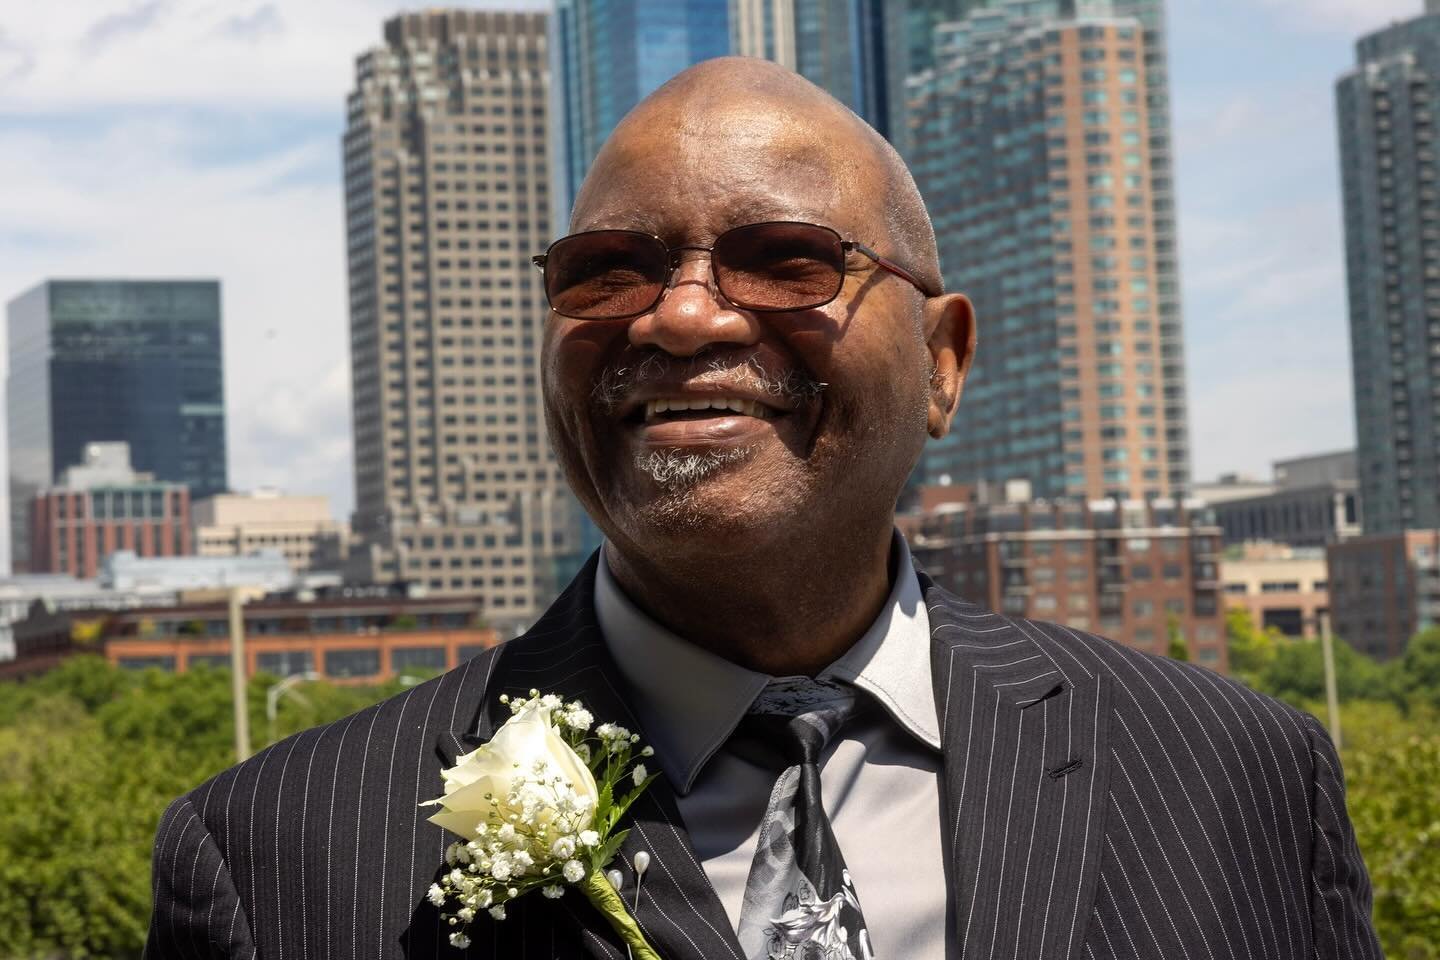 Congratulations to Calvin Palmer who was honored as the Hudson County Outstanding Senior of the Year for Jersey City.  Each year the county Department of Aging and Veterans Affairs selects one resident from each of the 12 towns for their service to t